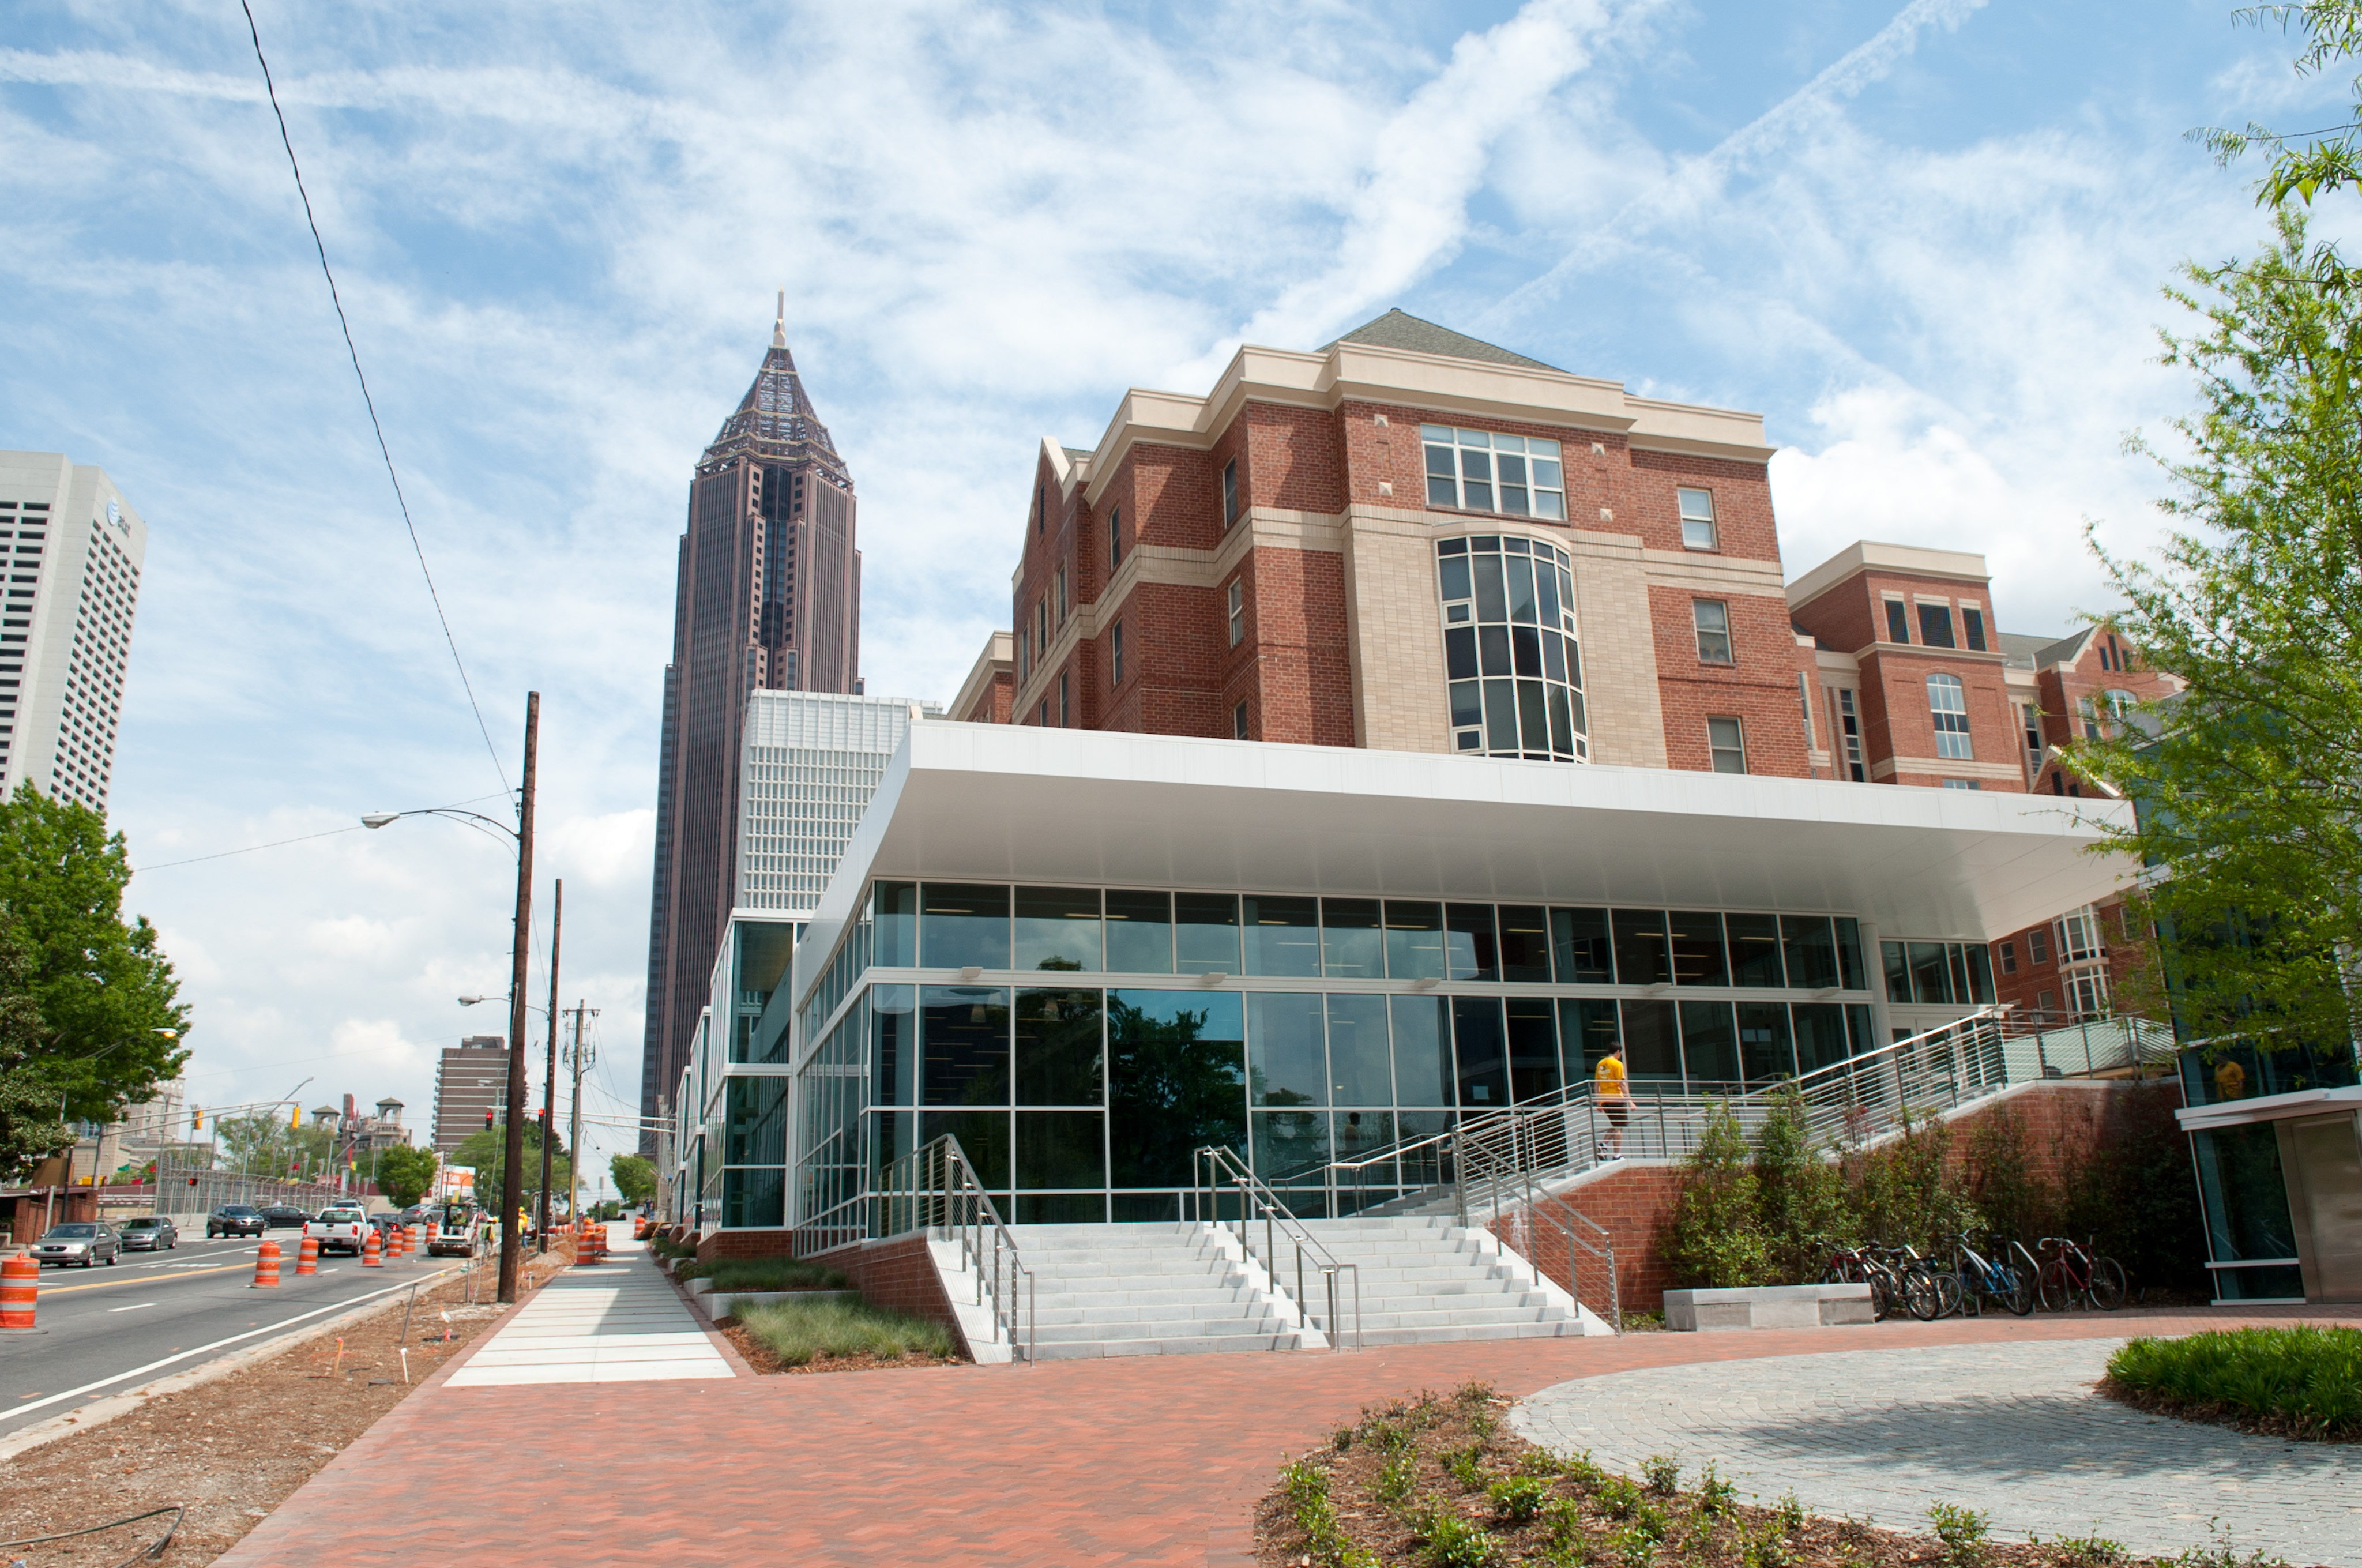 Exterior of the North Avenue Dining Hall, which opened to campus during the summer of 2011.